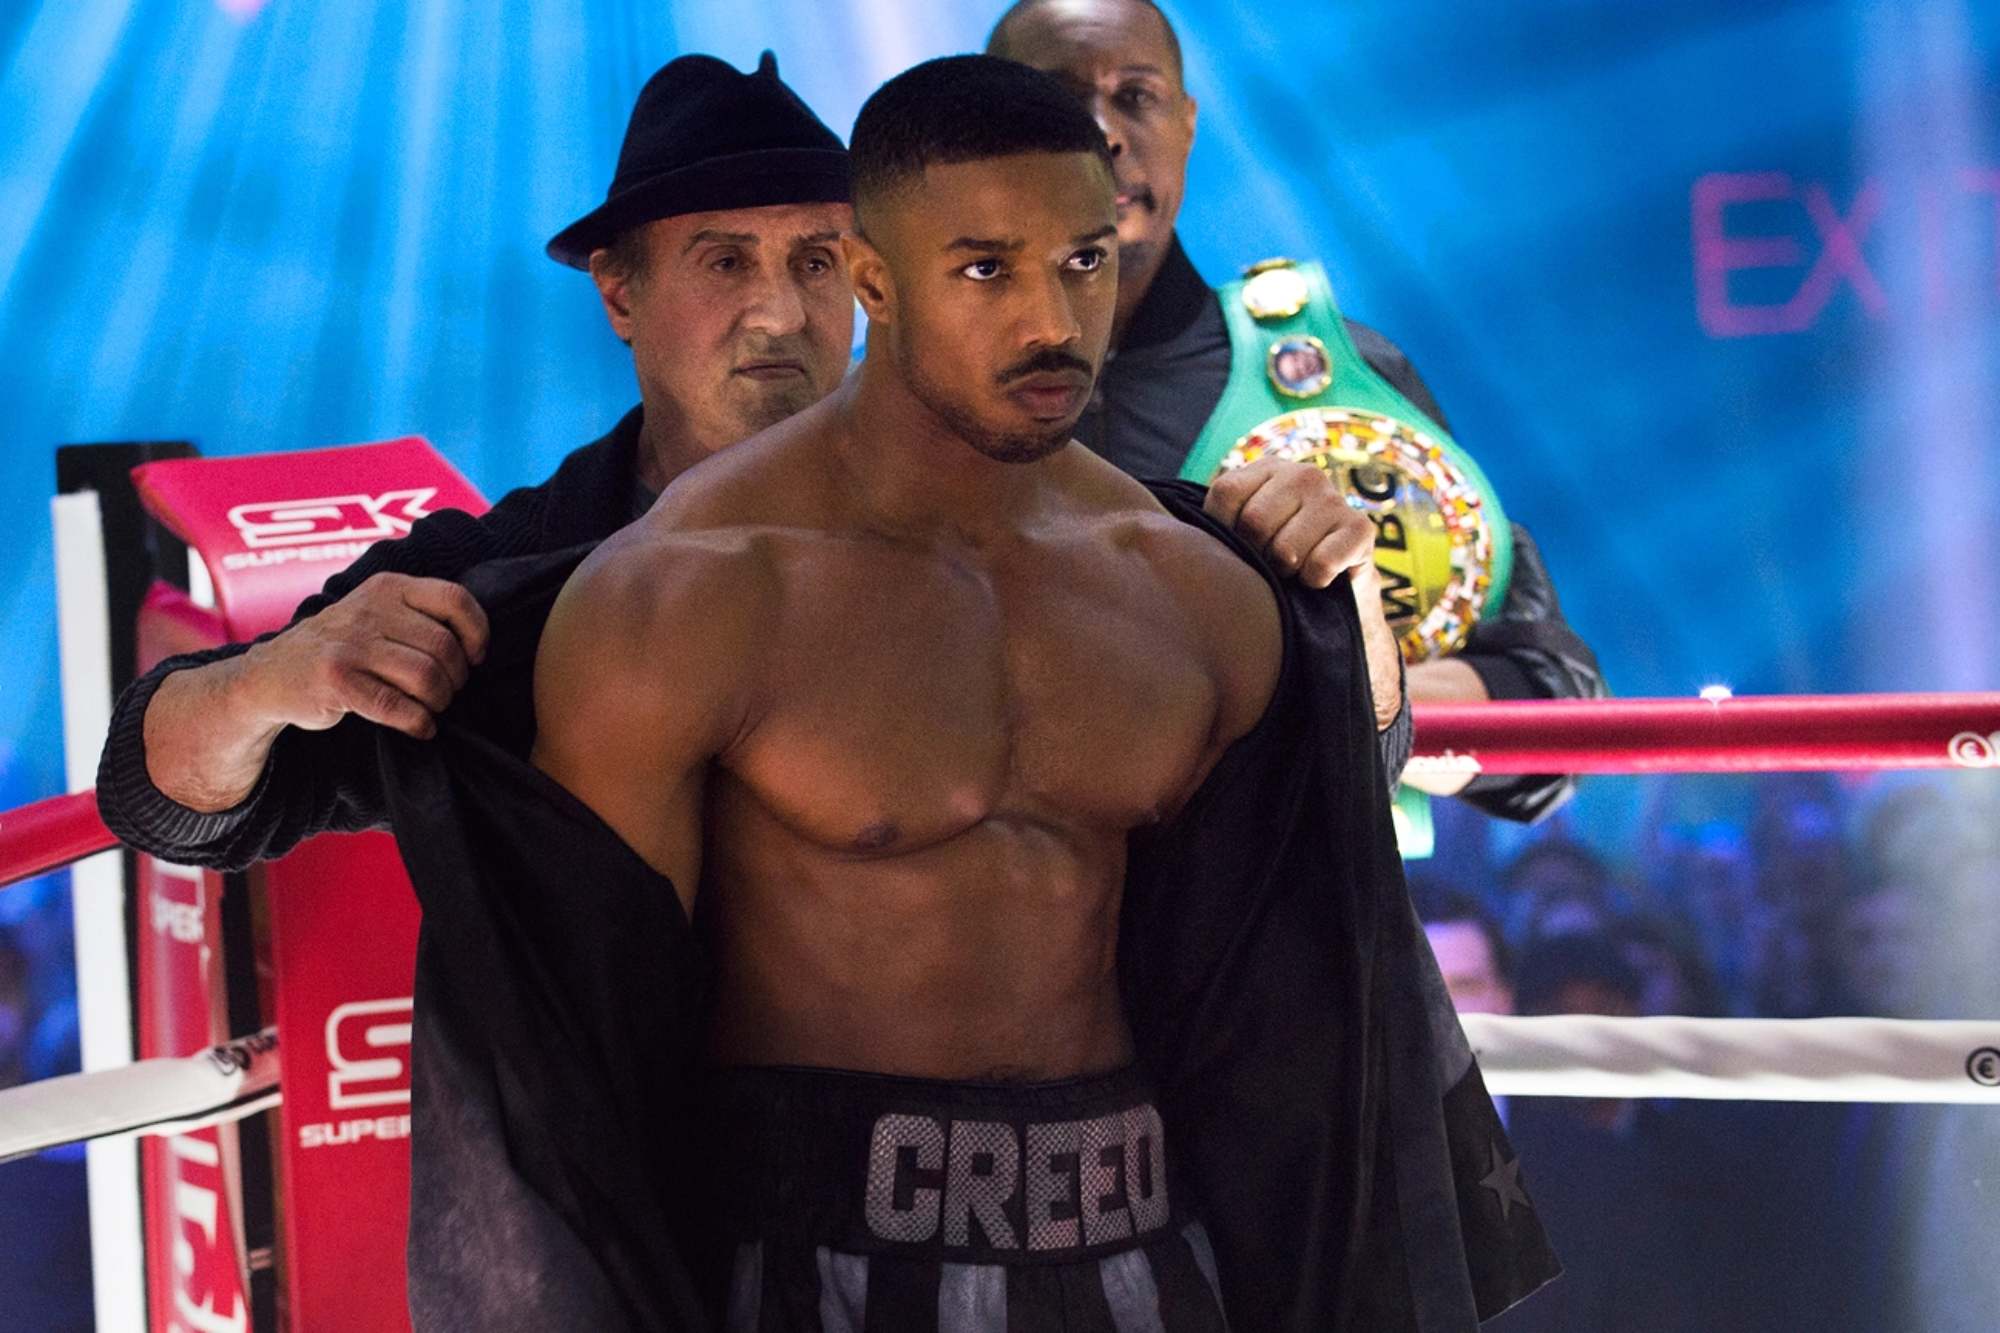 'Creed II' Sylvester Stallone as Rocky and Michael B. Jordan as Adonis Creed. Rocky is standing behind Adonis, taking his jacket off in the boxing ring.